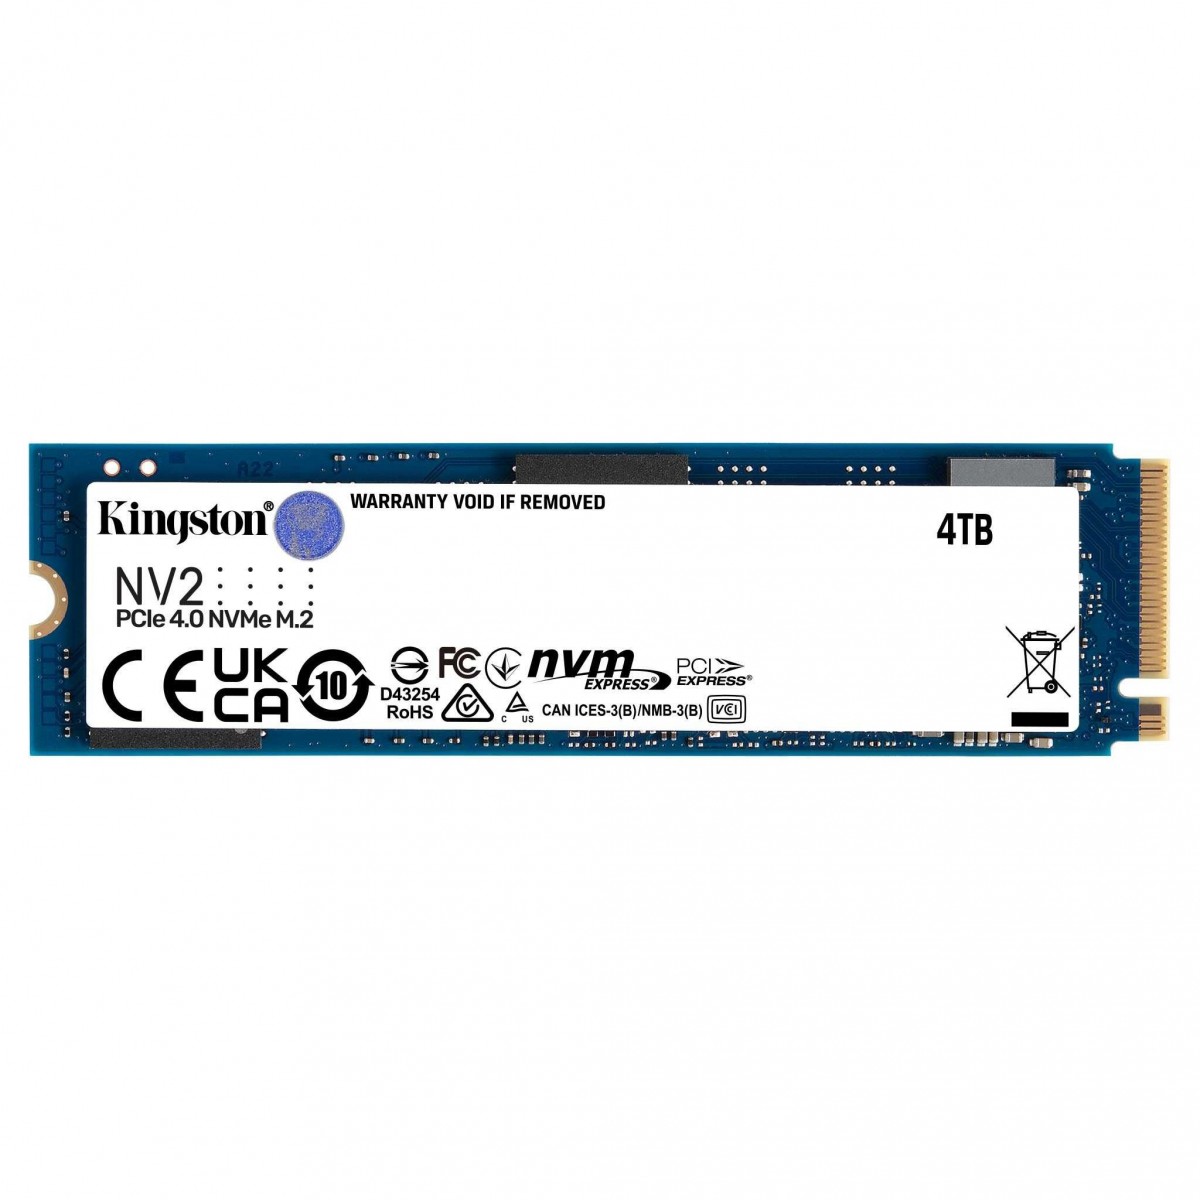 Kingston SSD NV2 M.2 4TB PCIe G4x4 2280 - Solid State Disk